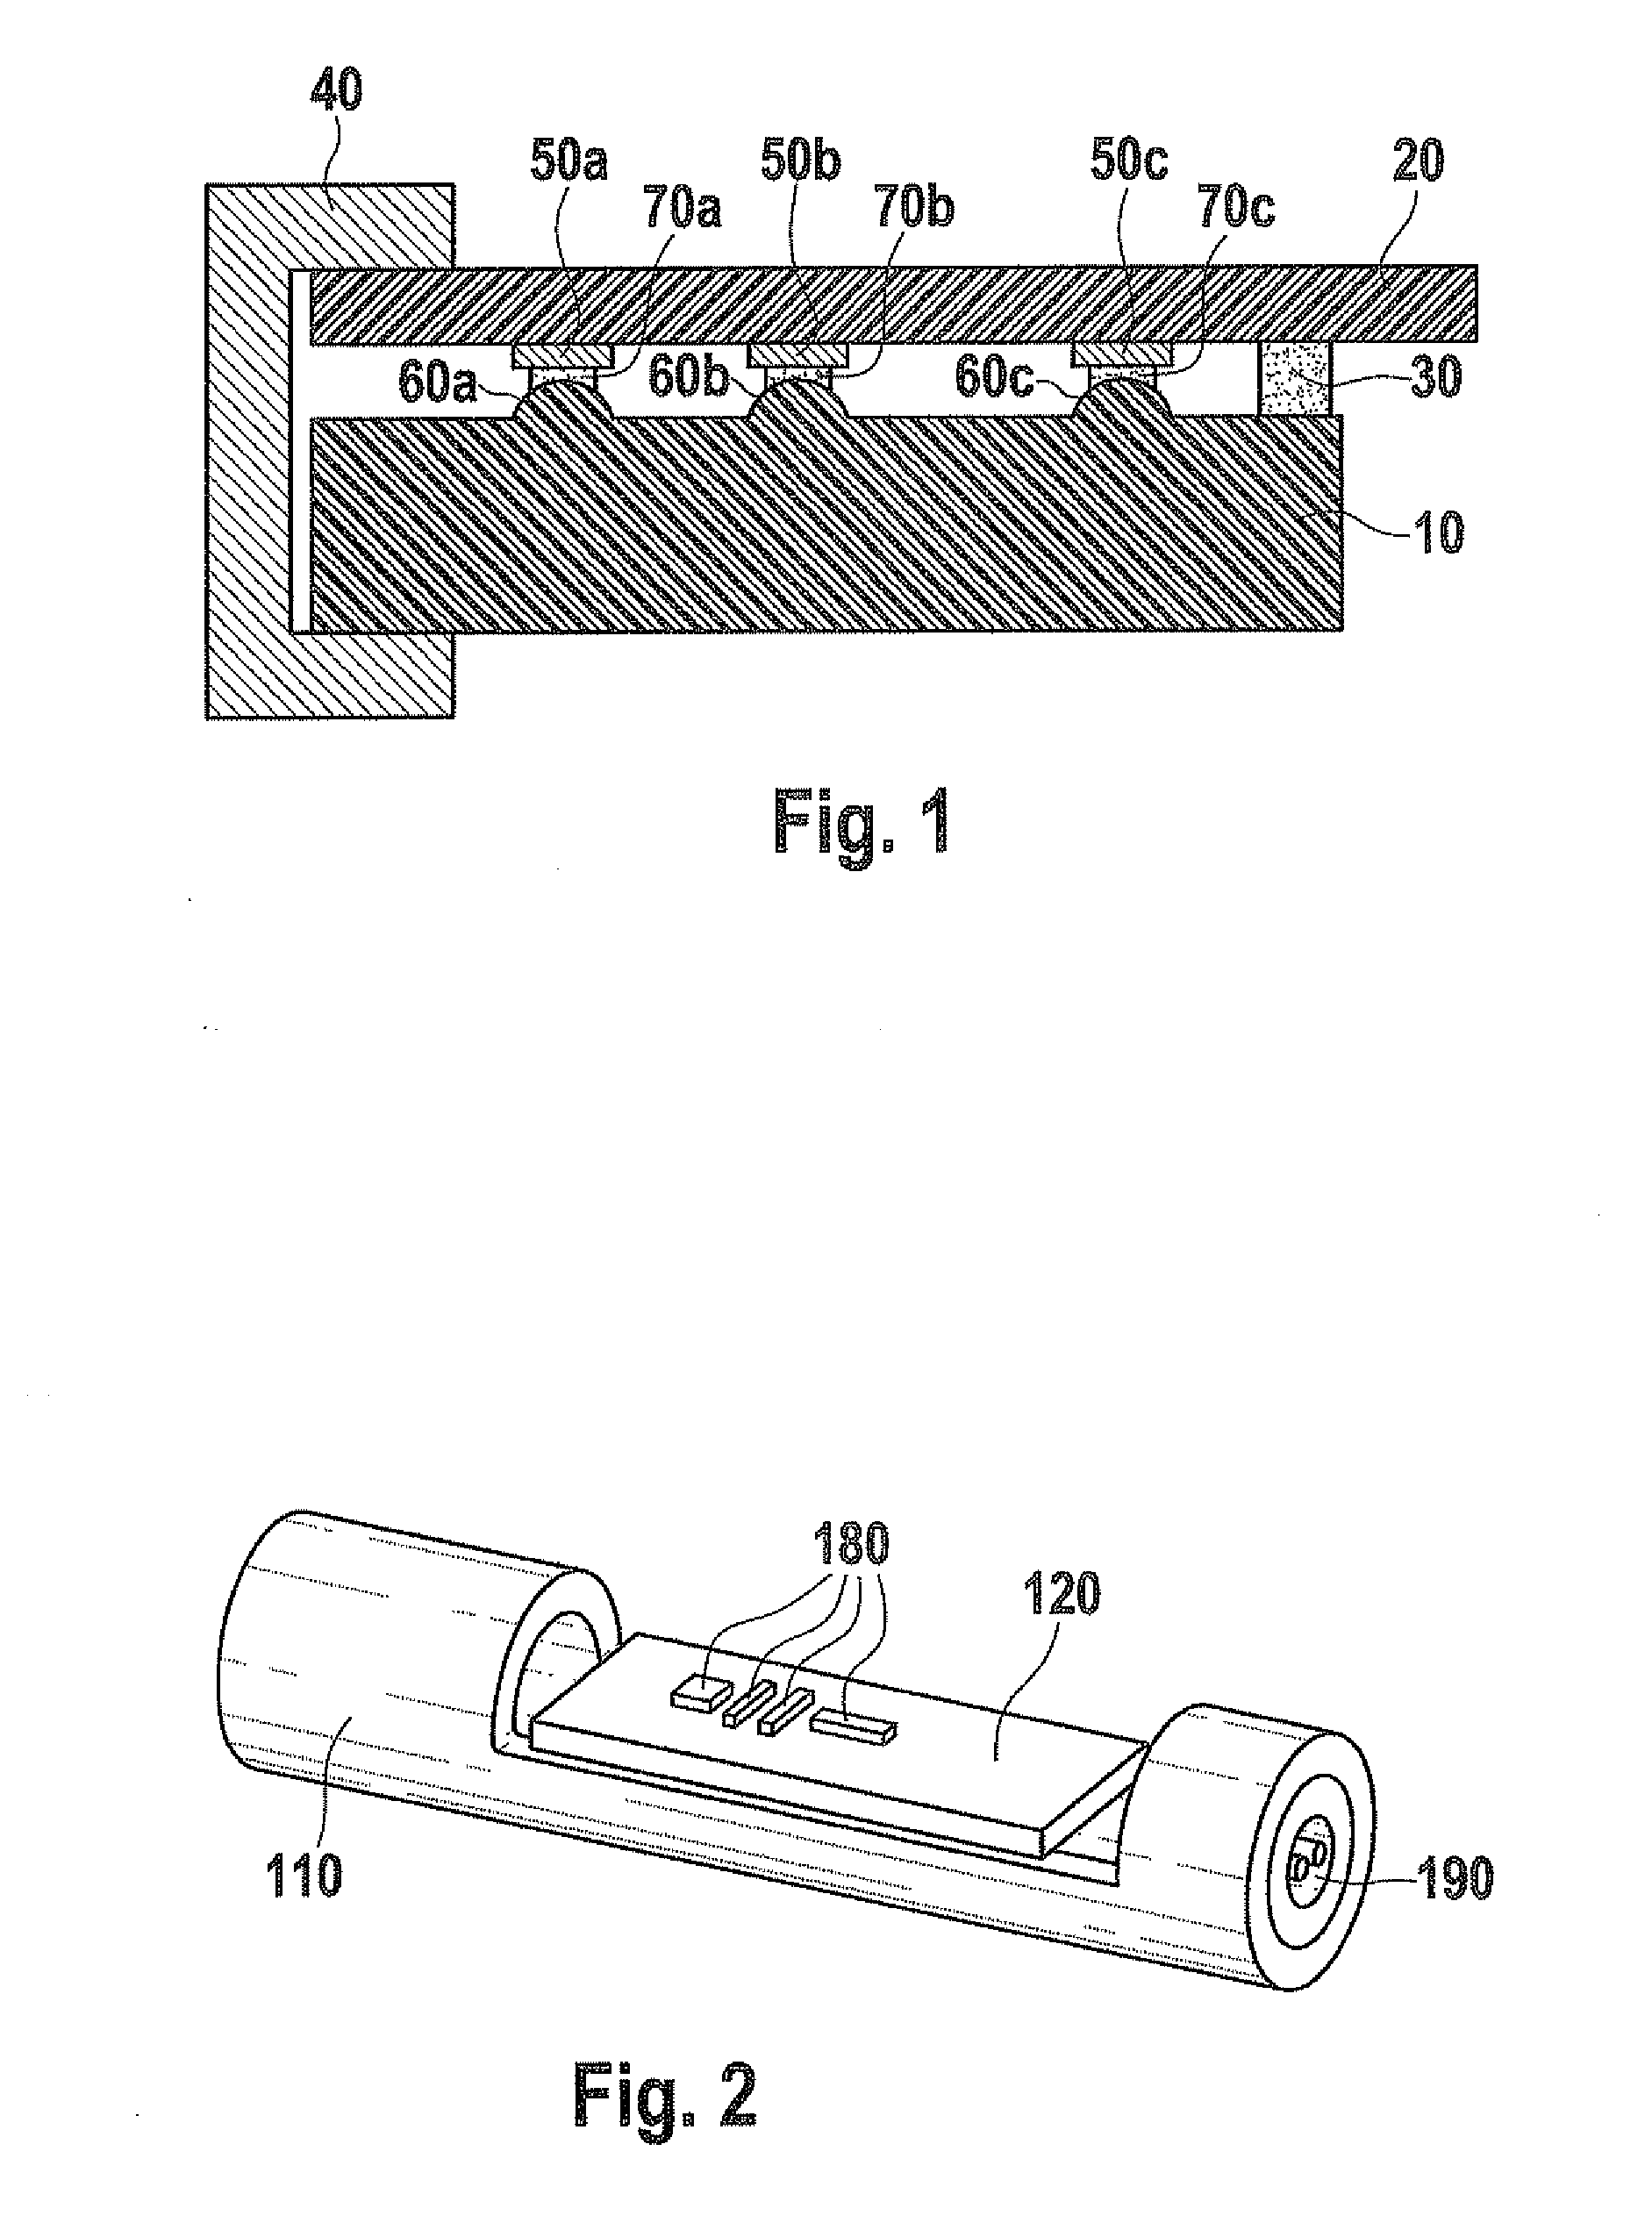 Electric circuit configuration having an mid circuit carrier and a connecting interface connected to it